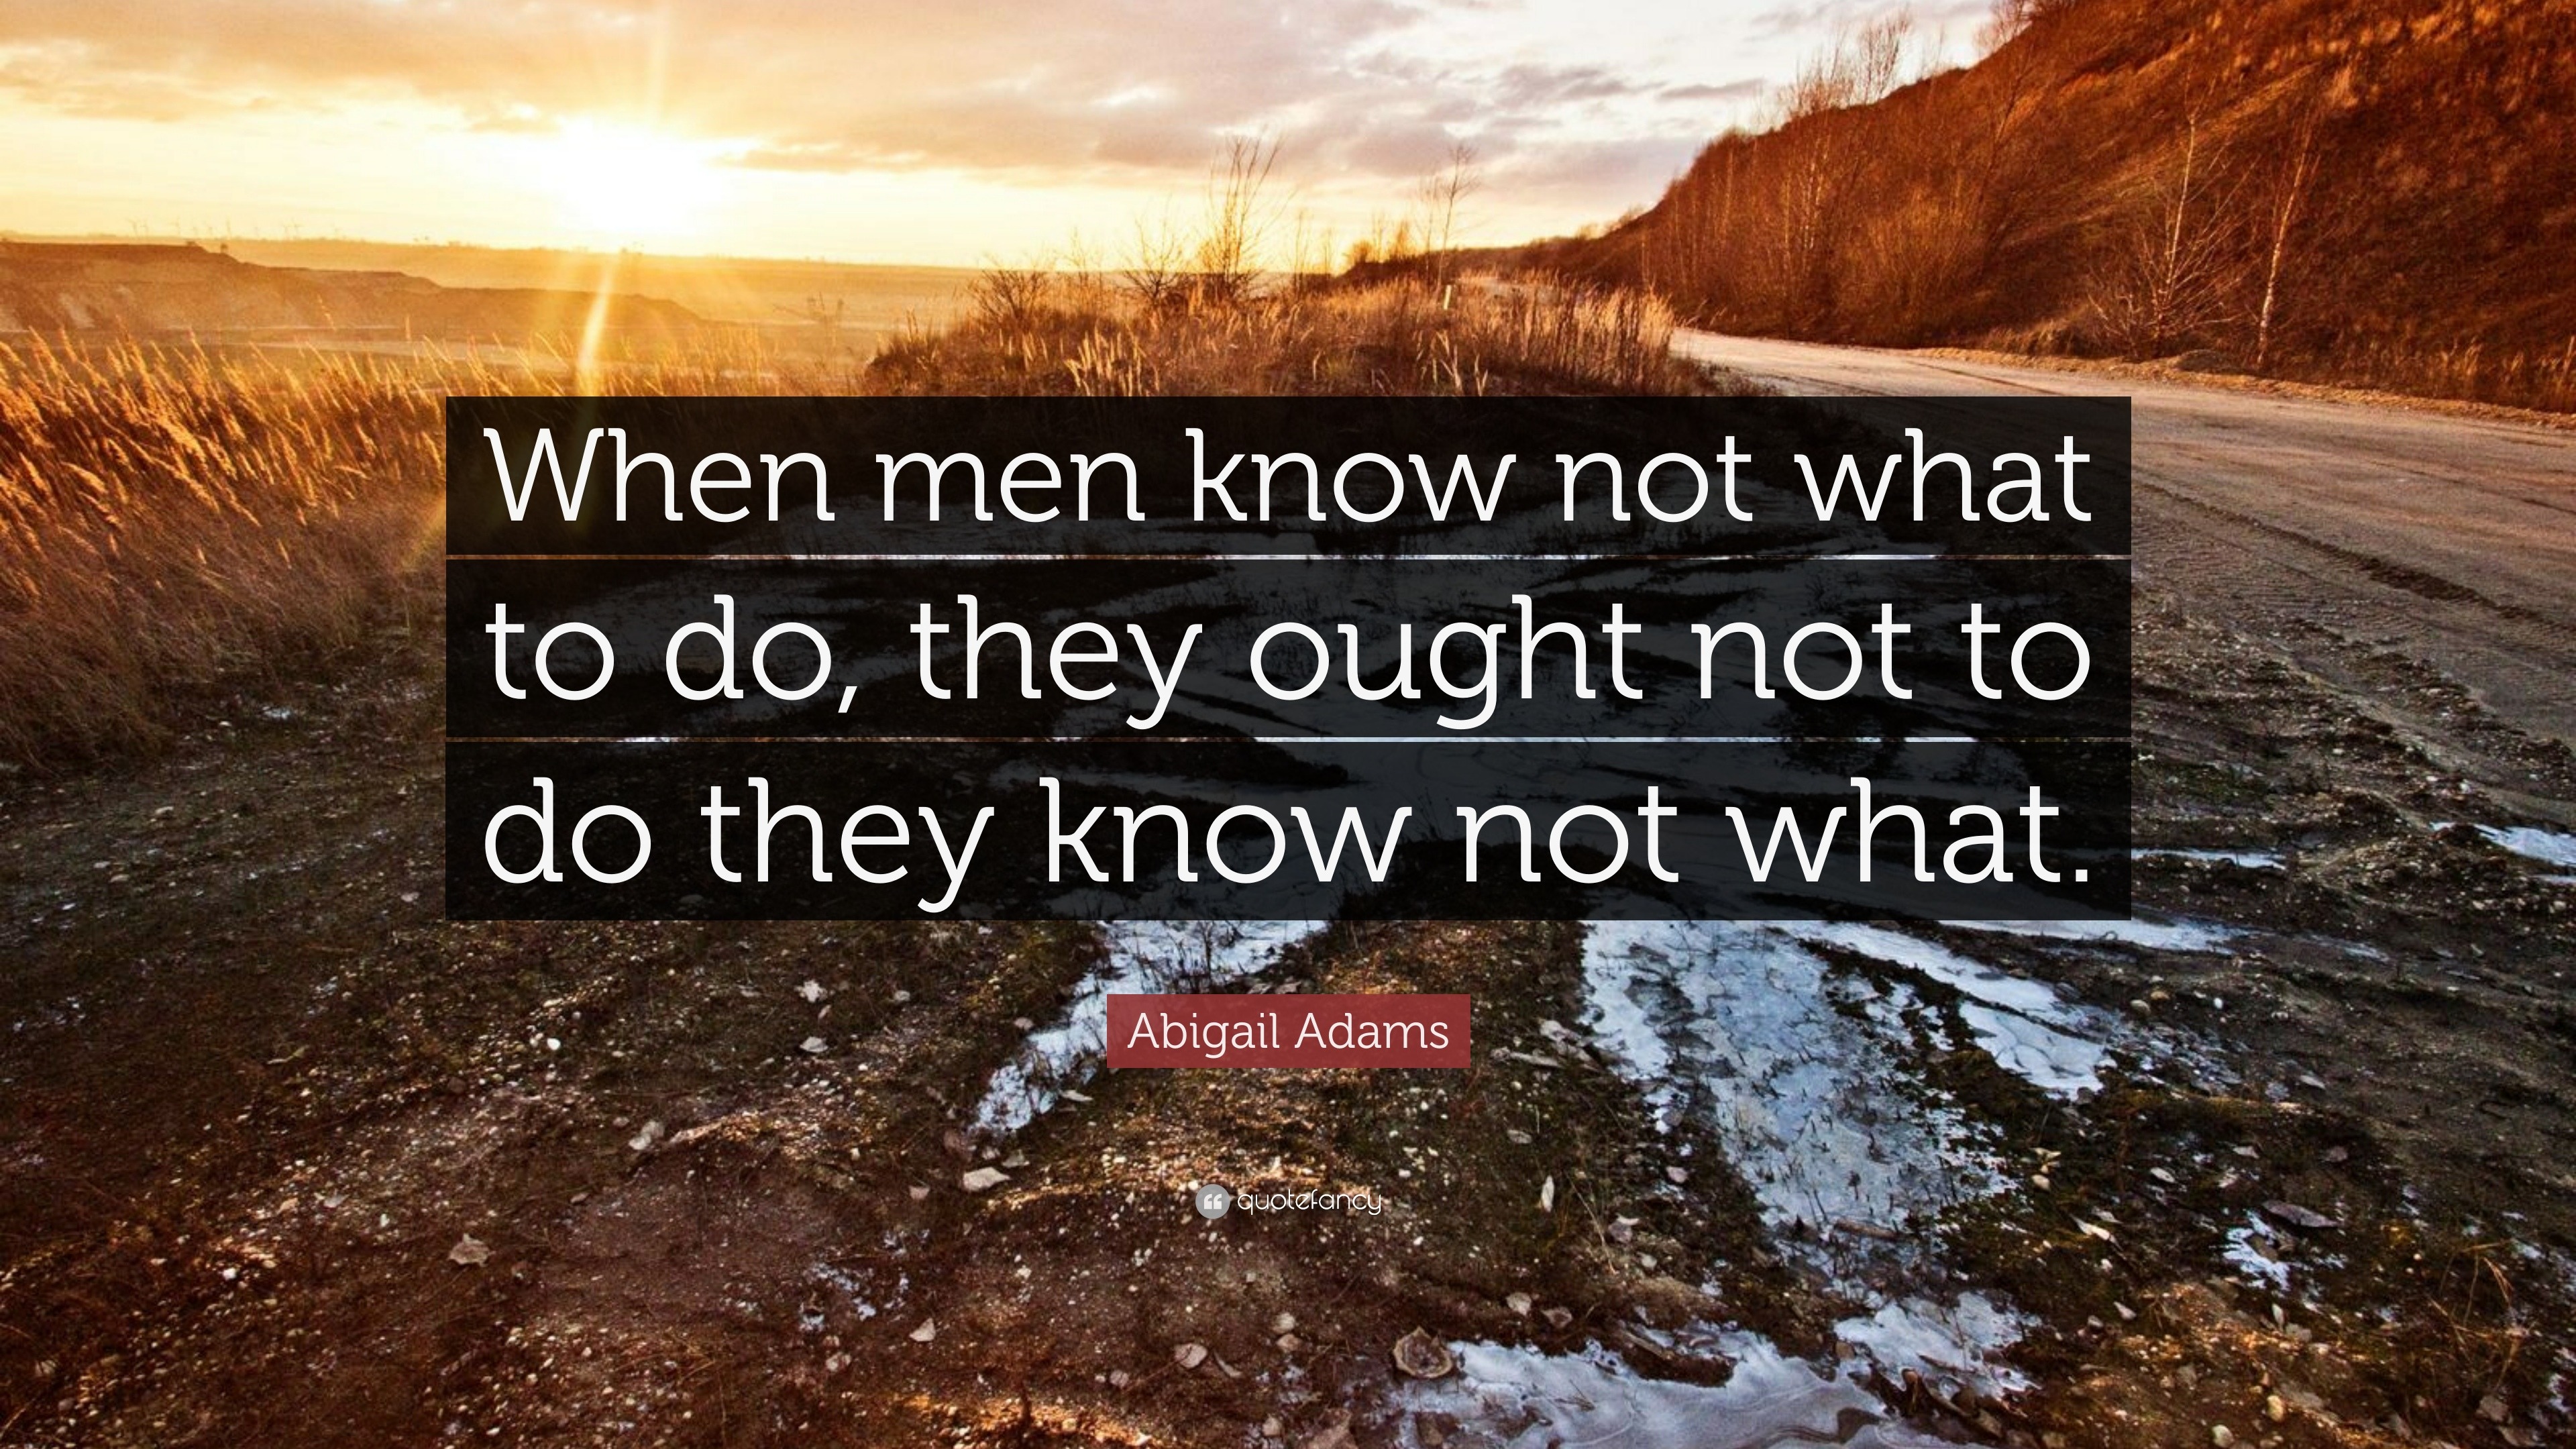 Abigail Adams Quote “when Men Know Not What To Do They Ought Not To Do They Know Not What ”